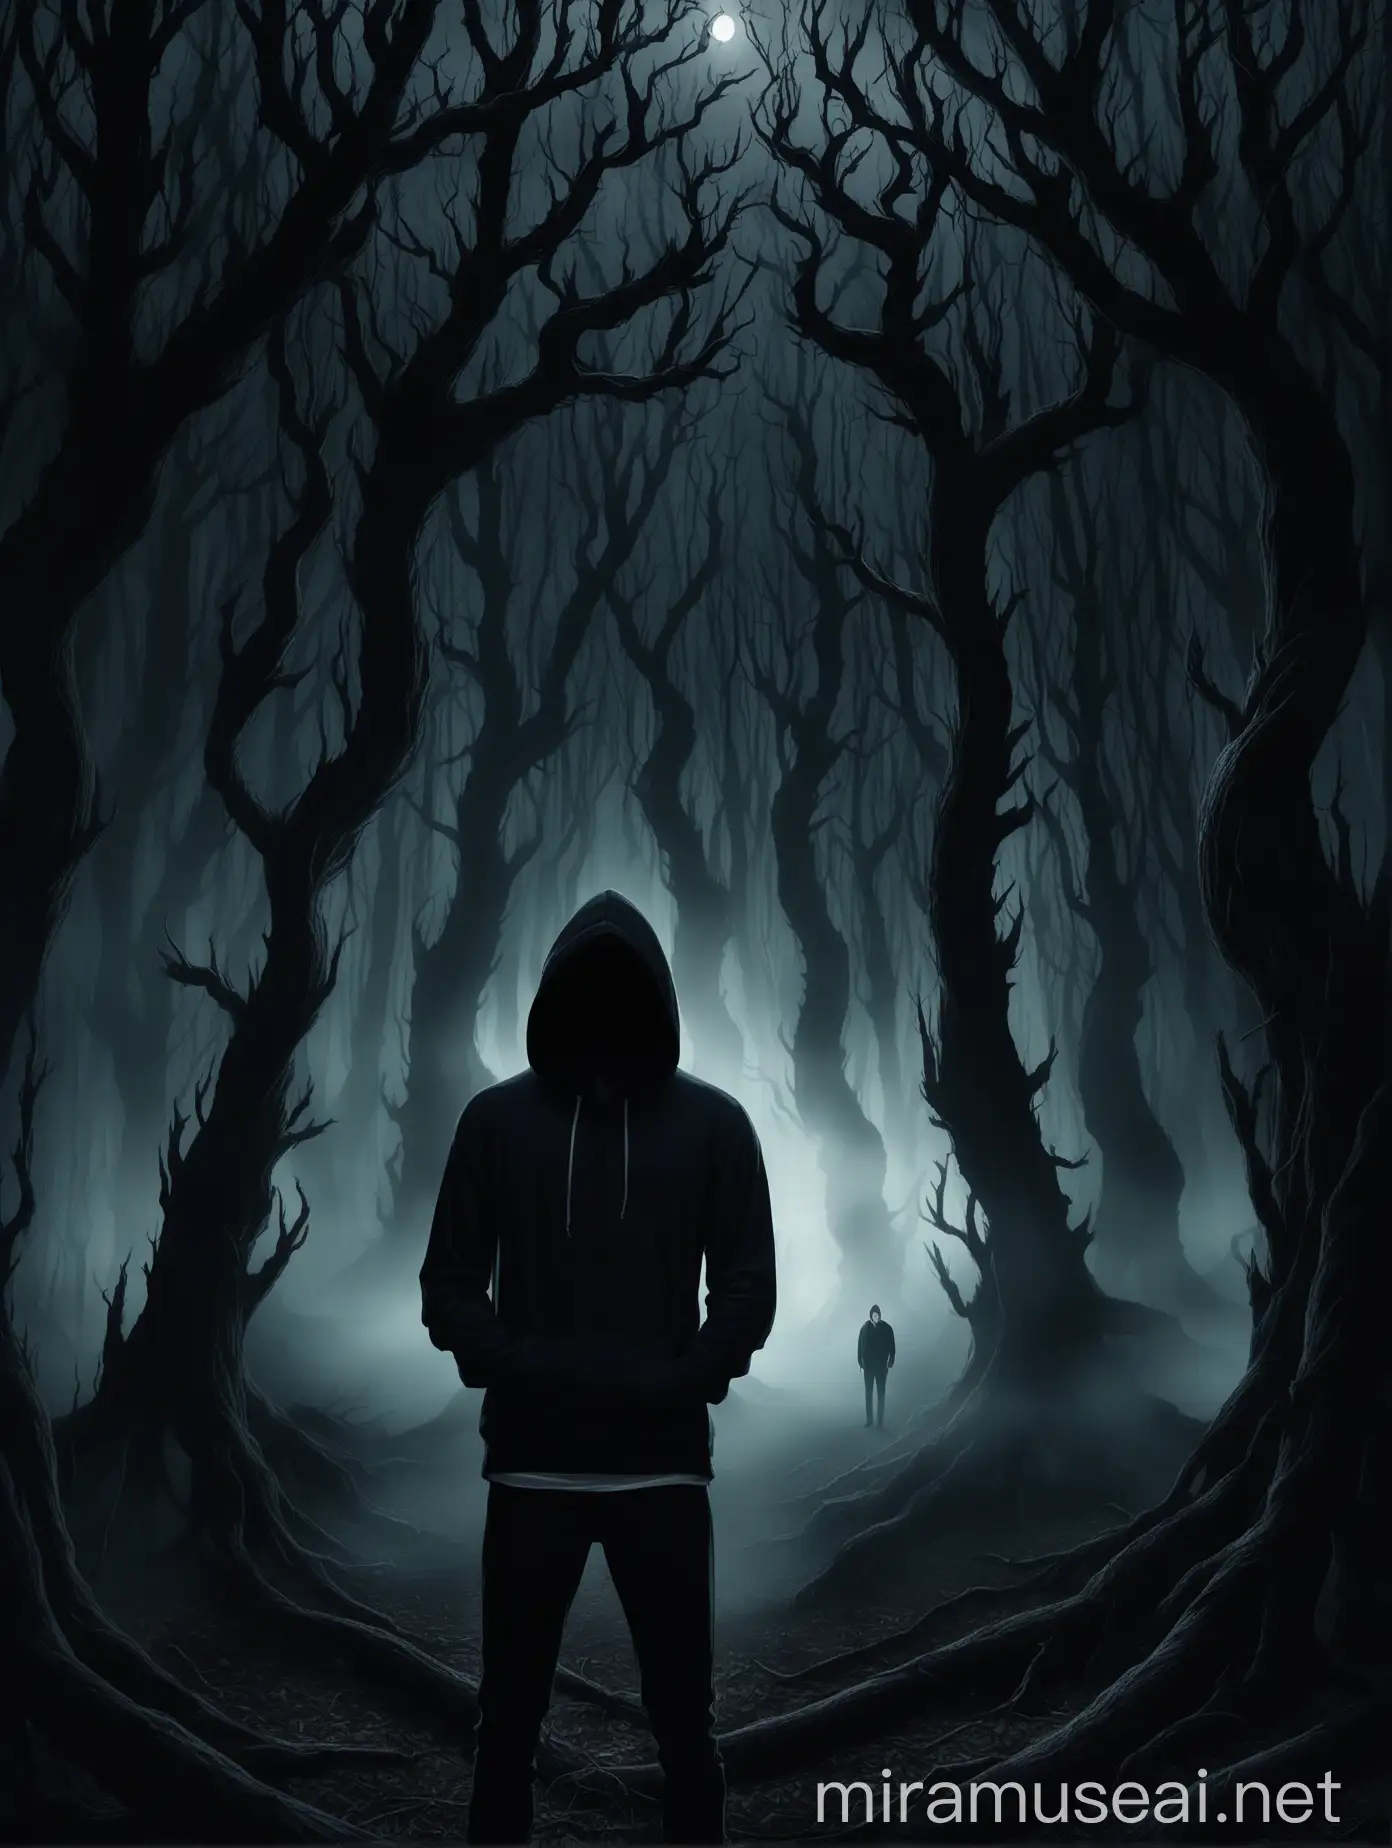 A handsome young man of twenty five years putting on a dark hoodie, facing a scary dark forest with twisted crooked trees, with fogs engulfing the midnight